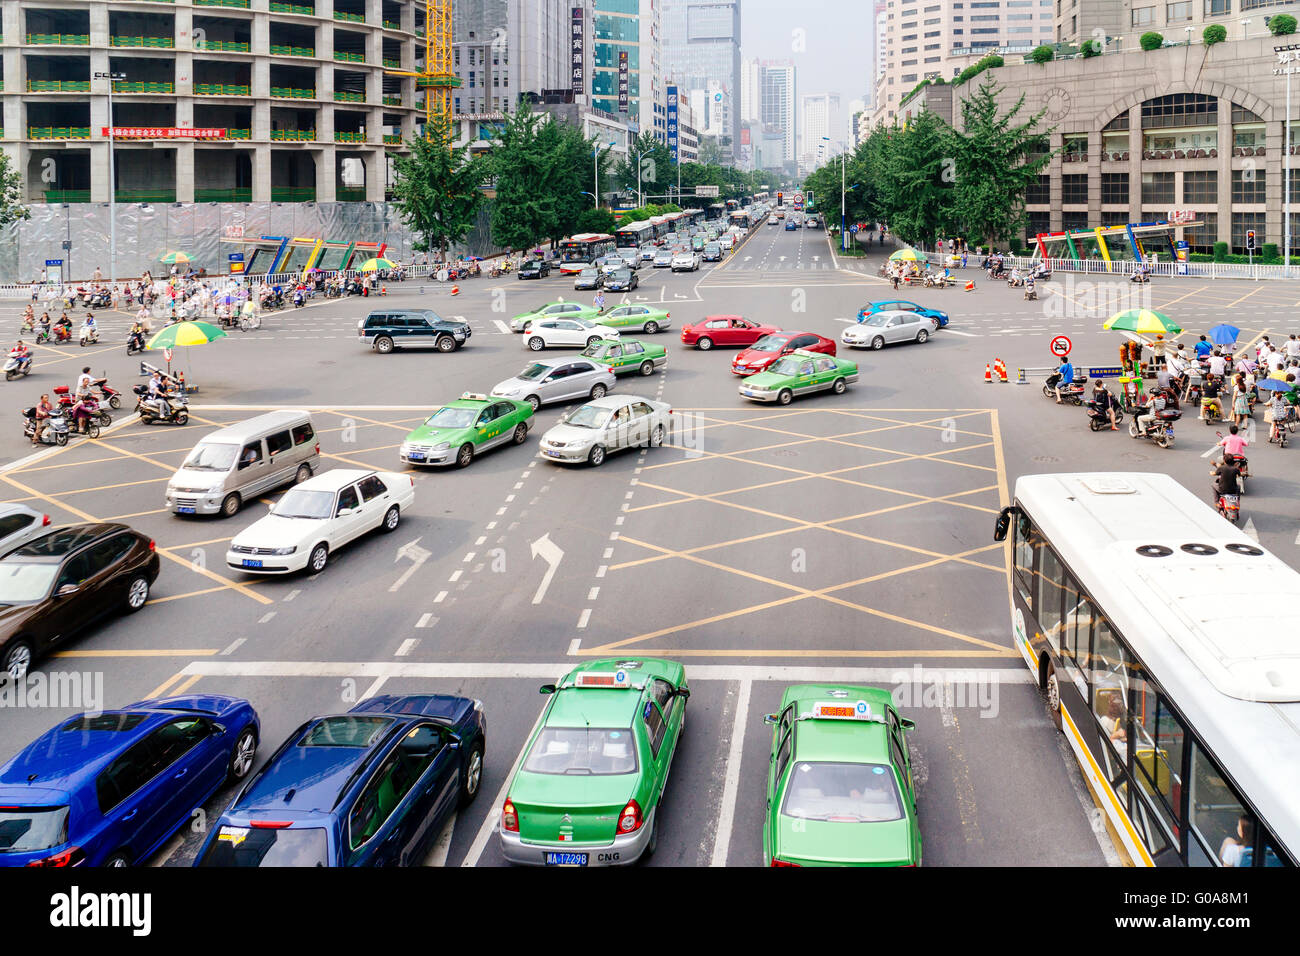 Chengdu, Sichuan province, China - The view at Tianfu Avenue with a heave traffic jam in the rush hour. Stock Photo